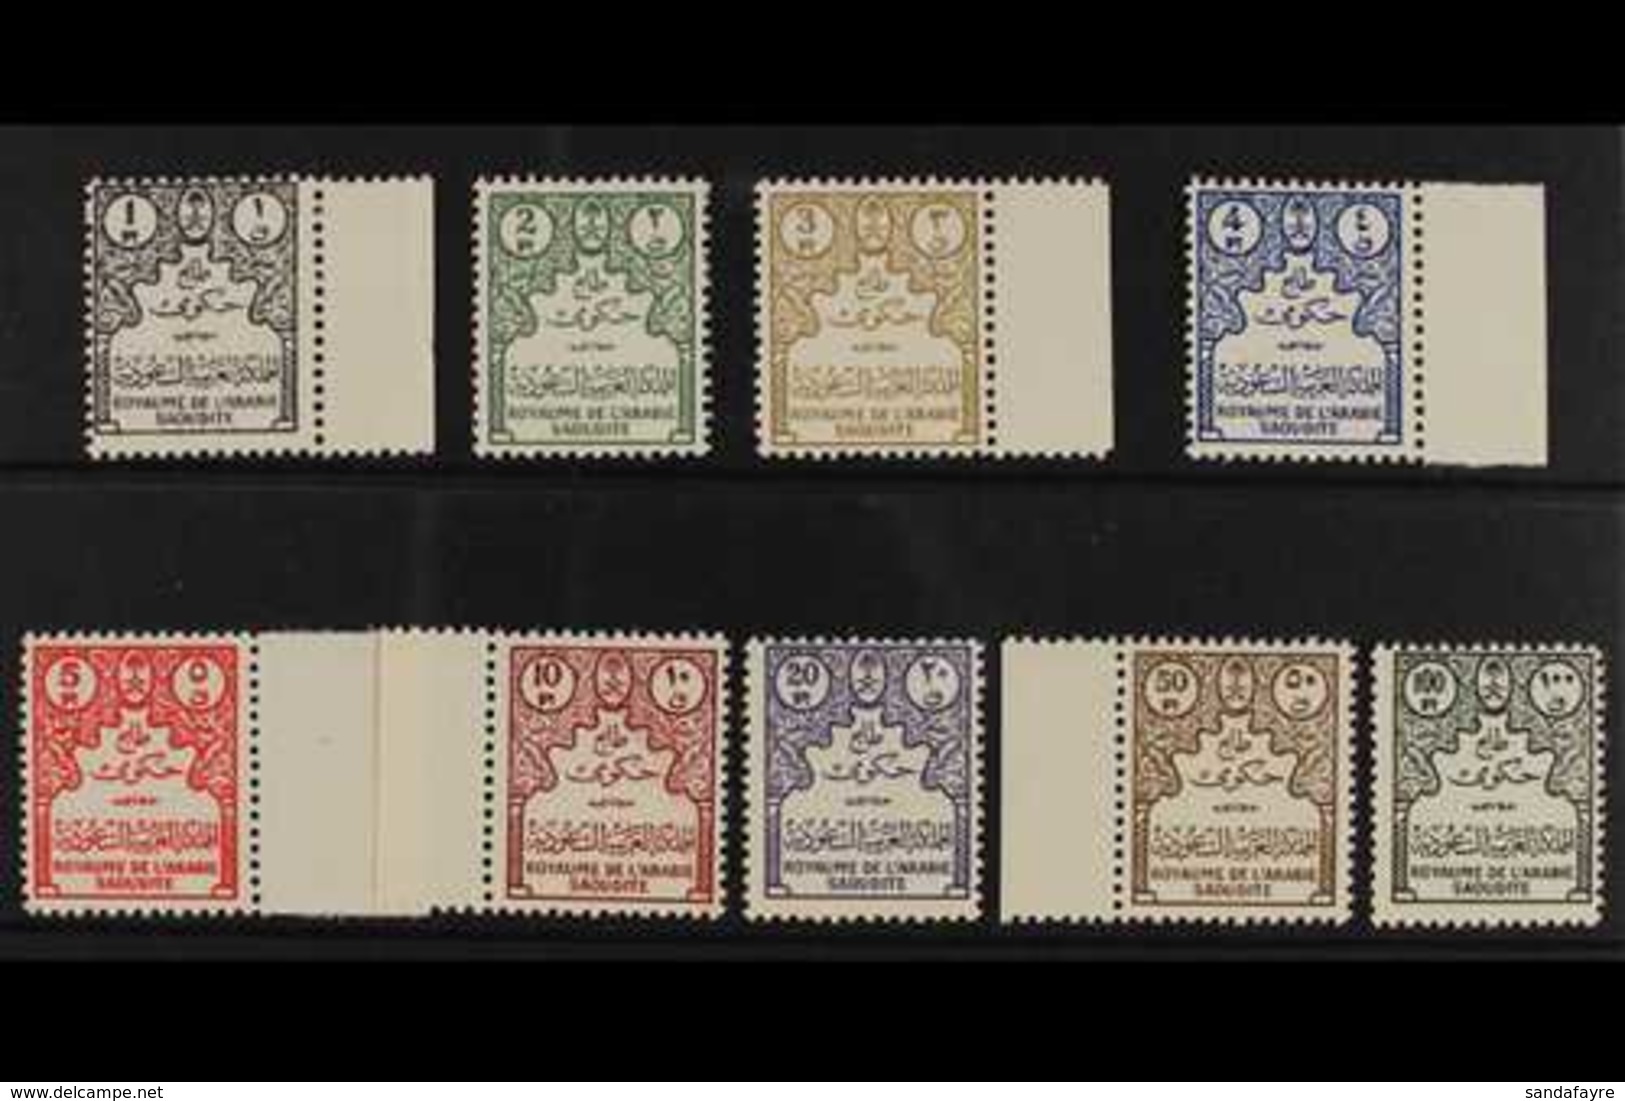 OFFICIALS  1961 Complete Set (many Are Marginal Examples), SG O449/O457, Never Hinged Mint. (9 Stamps) For More Images,  - Arabie Saoudite